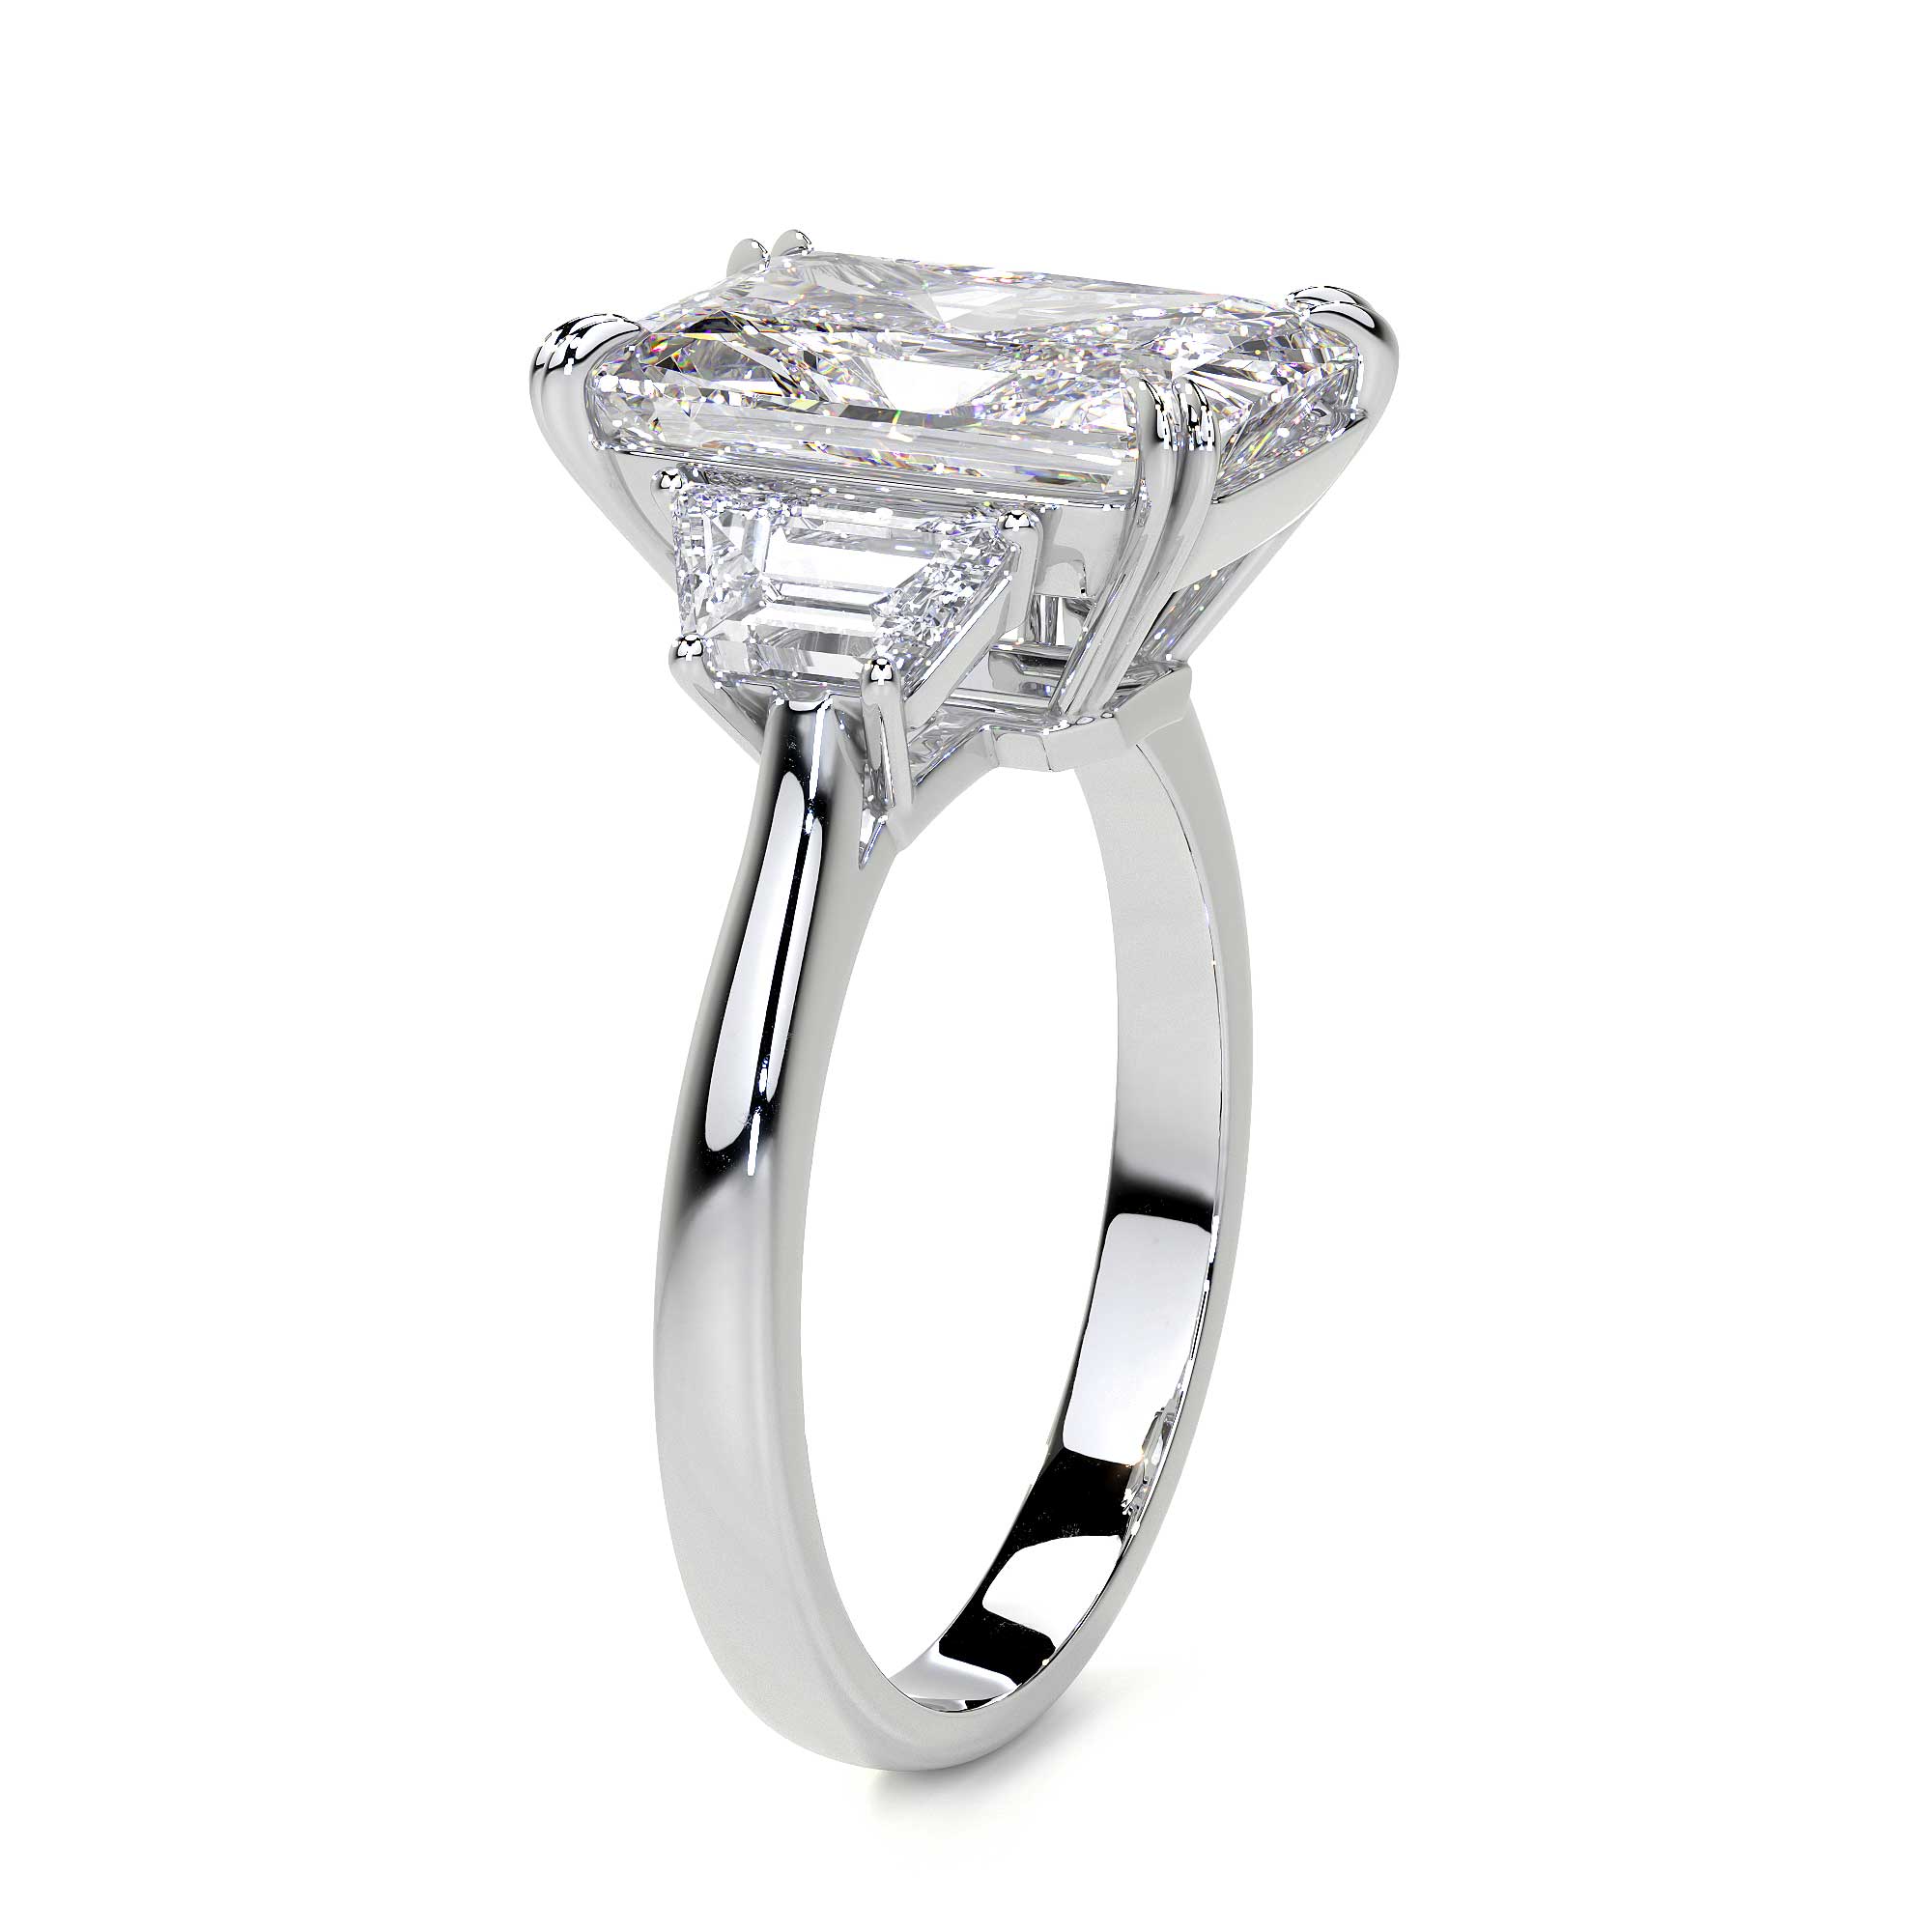 All About Radiant Cut Diamonds For Engagement Rings - Robbins Brothers Blog